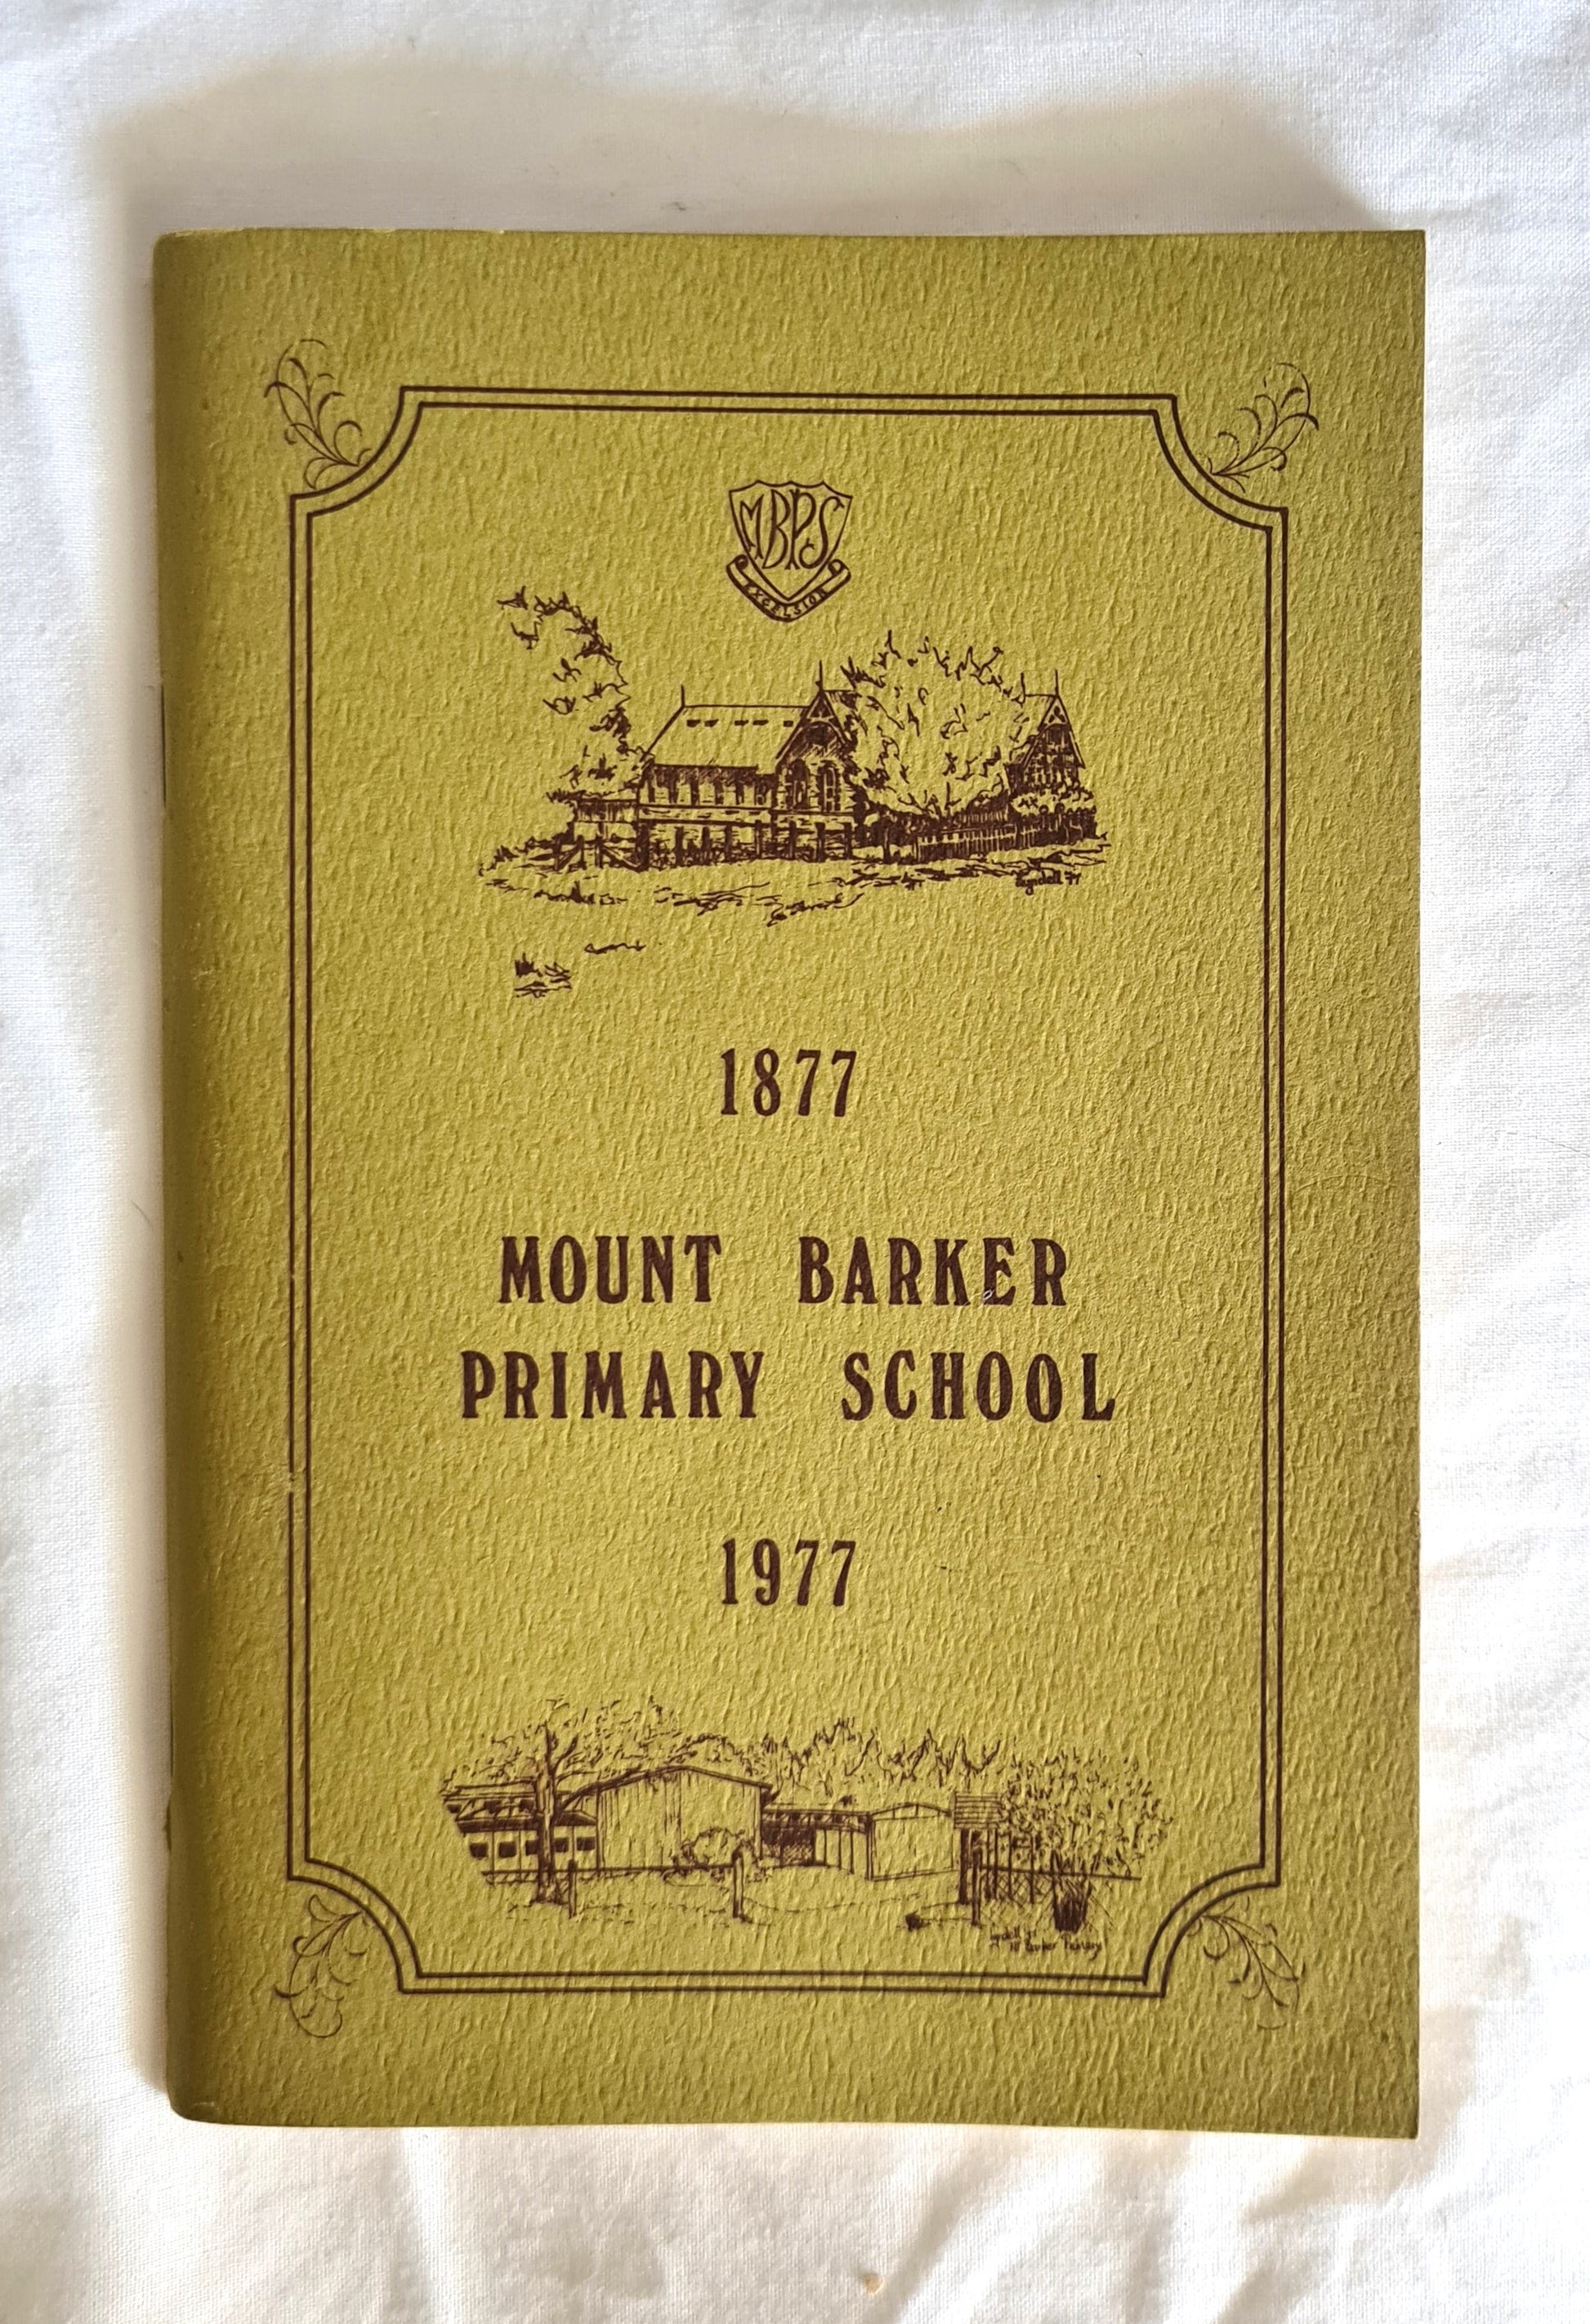 Mount Barker Primary School  1877-1977  by J. Beard, M. Hillam, and J. Simmons  illustrated by L. Davidge